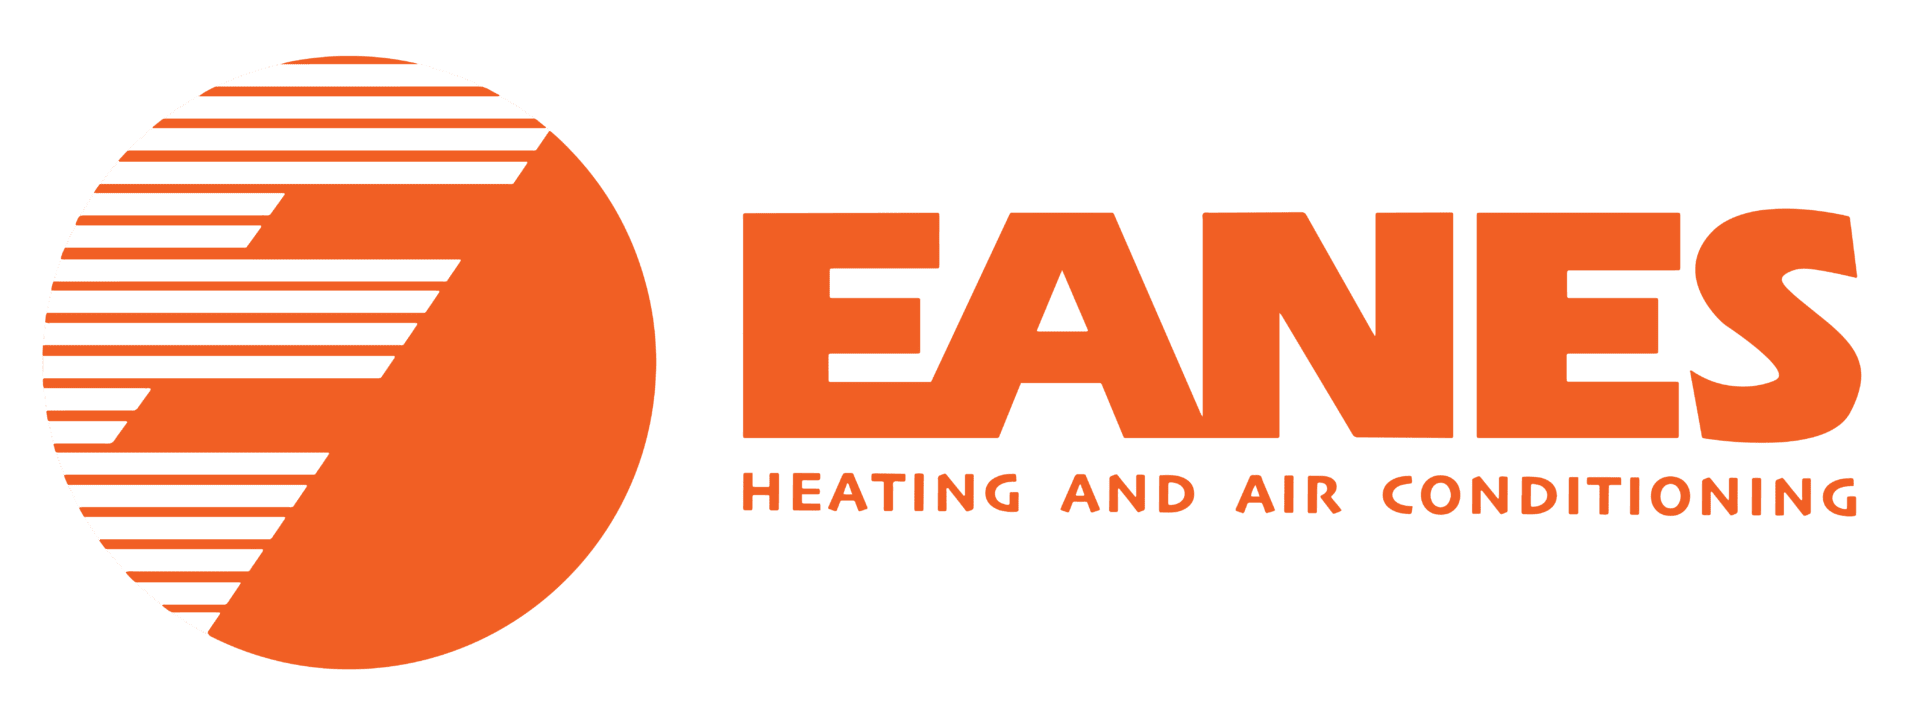 3 Reasons Why Proper Ventilation Matters During Cold Weather | Eanes Heating & Air